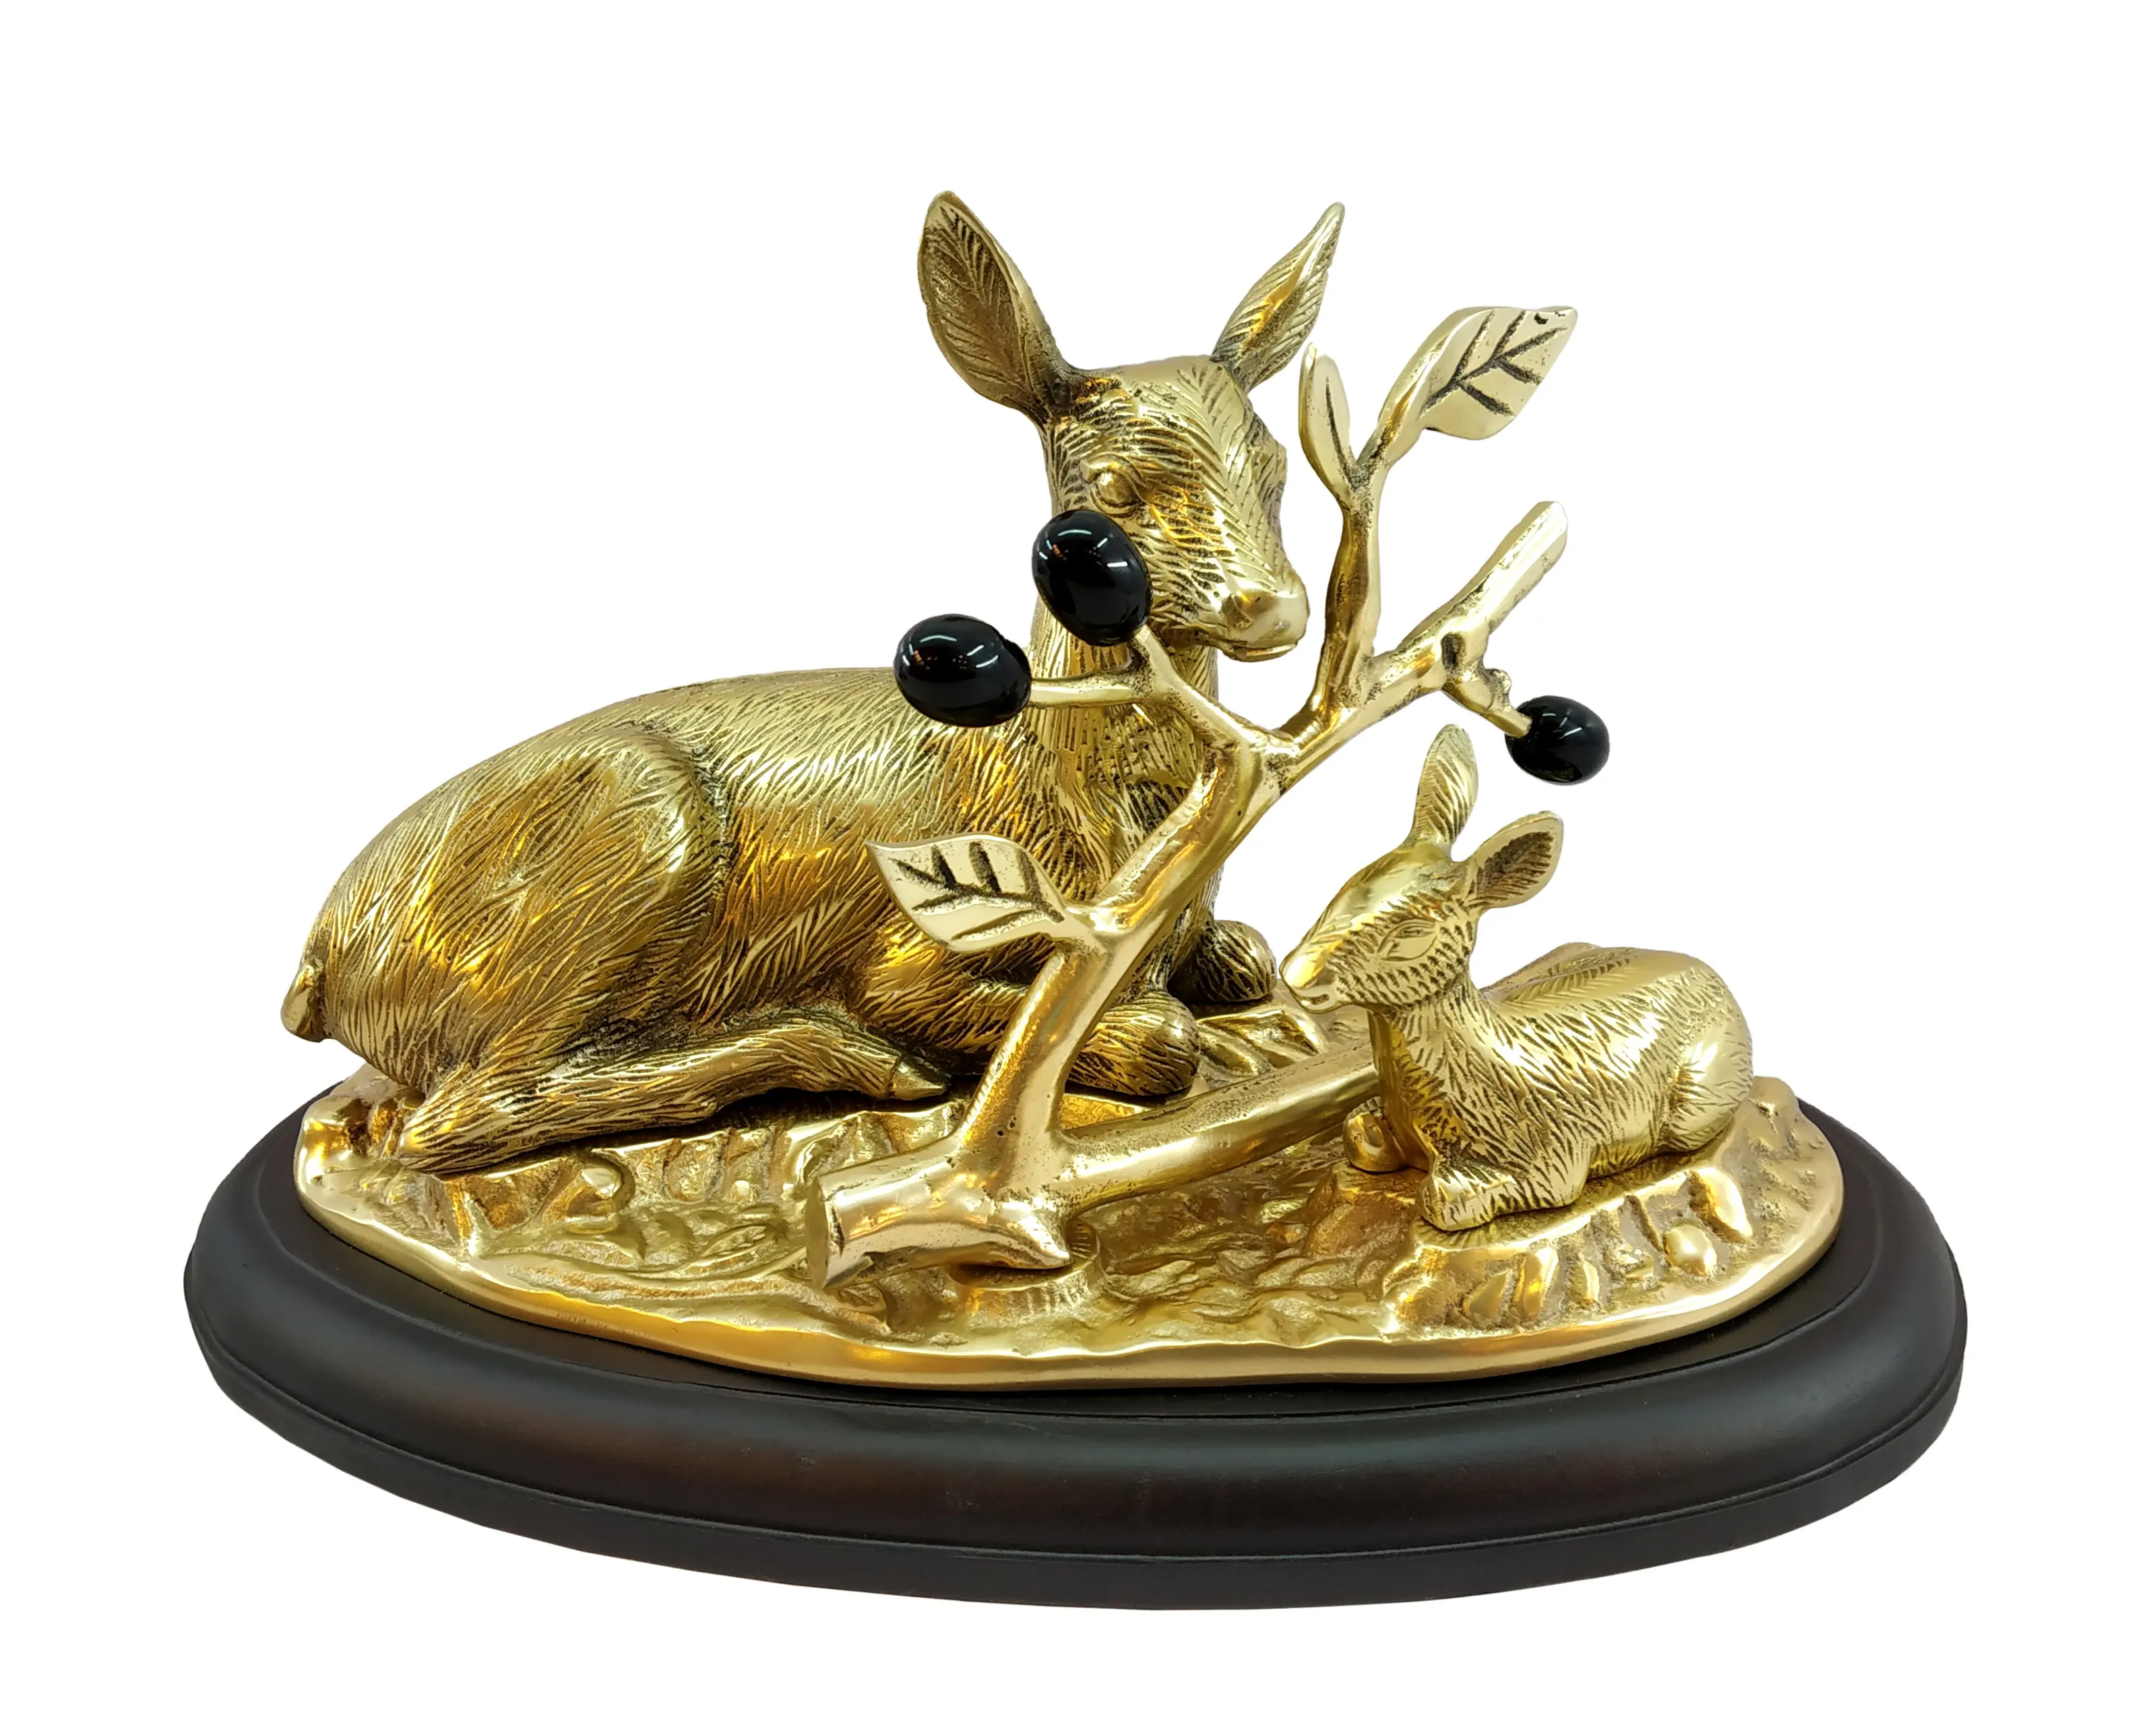 Deer Family Statue Animal Statues Handicraft Manufacturers Figurine Sculpture in Metal Luxury Gift in Home Decor in Indian India